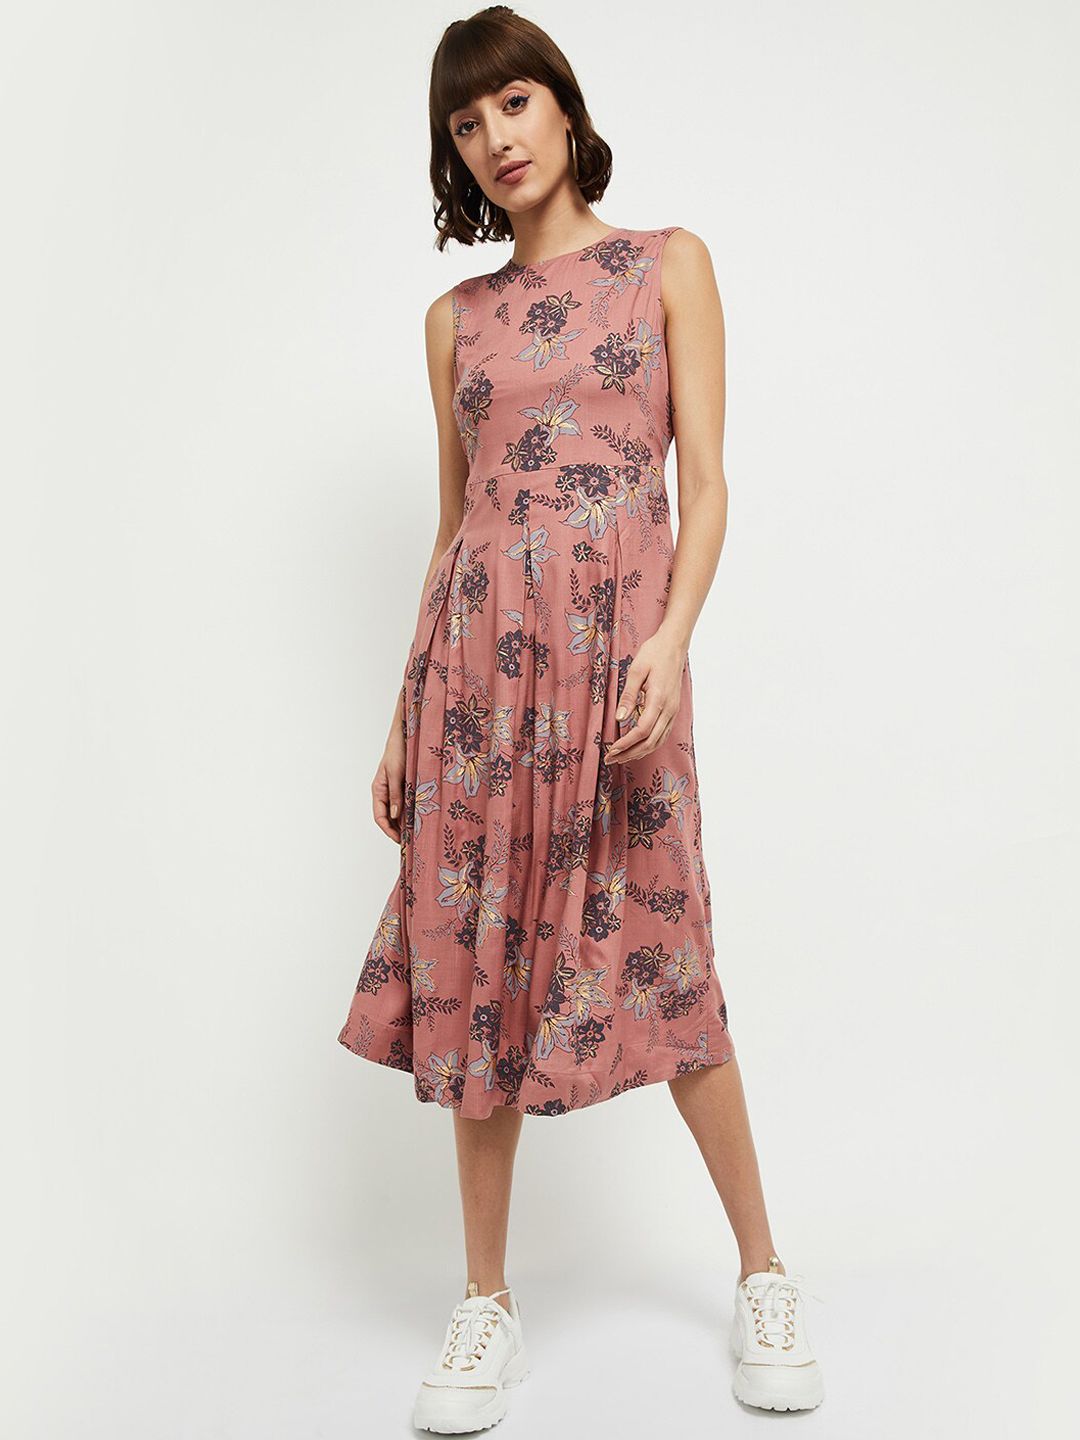 max Women Pink Floral Midi Dress Price in India